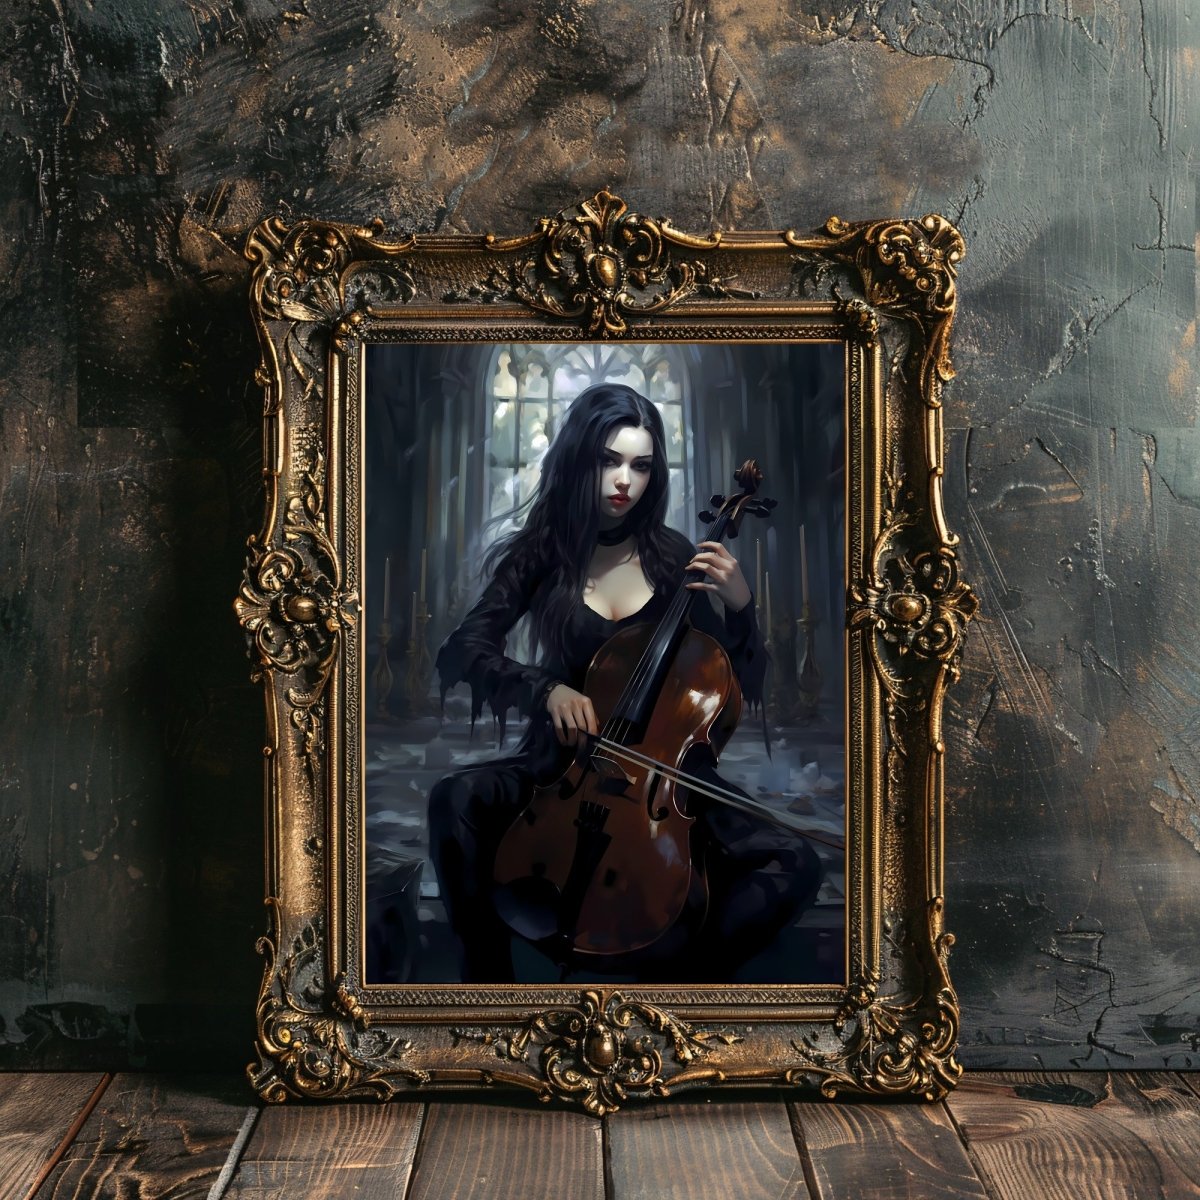 Goth Girl playing Cello on a Wednesday Gothic Wall Art Paper Poster Prints Dark Spooky Decor Fantasy Poster Dark Academia Gothic Retro Ghost Wall Art Wicca - Everything Pixel